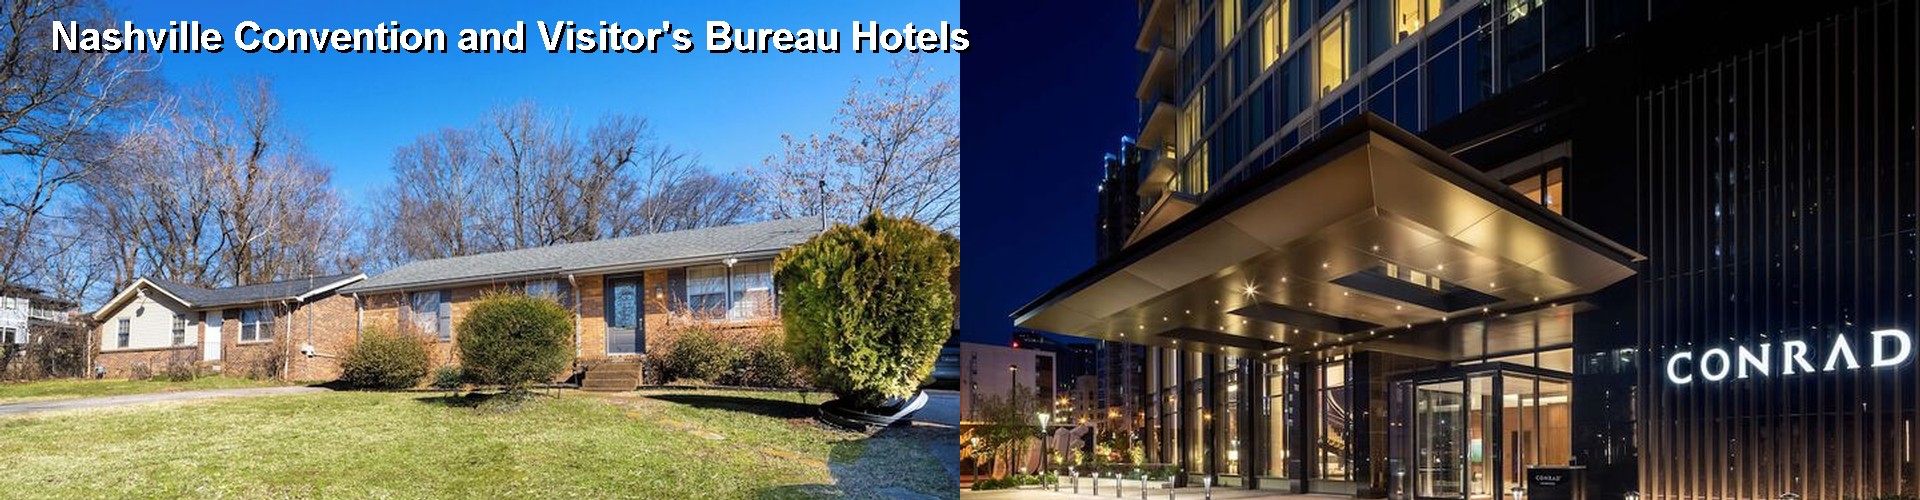 5 Best Hotels near Nashville Convention and Visitor's Bureau